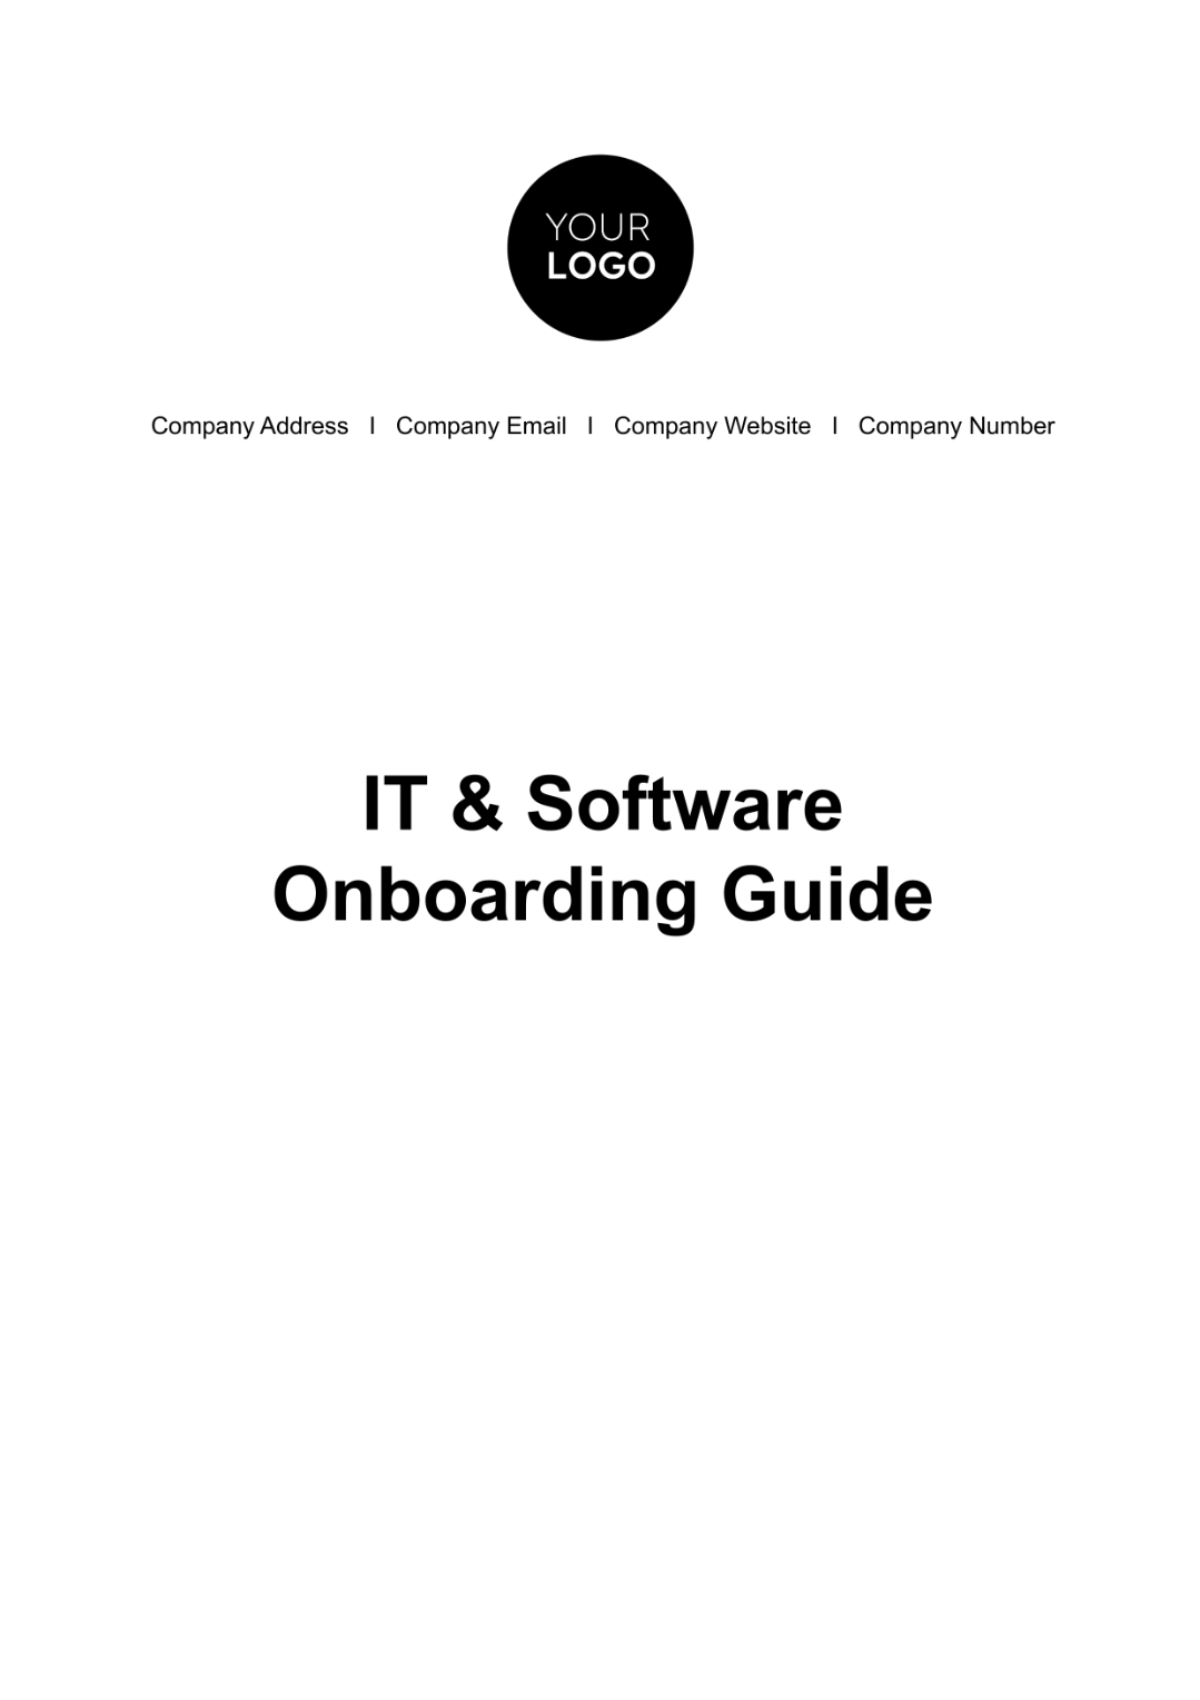 IT & Software Onboarding Guide HR Template